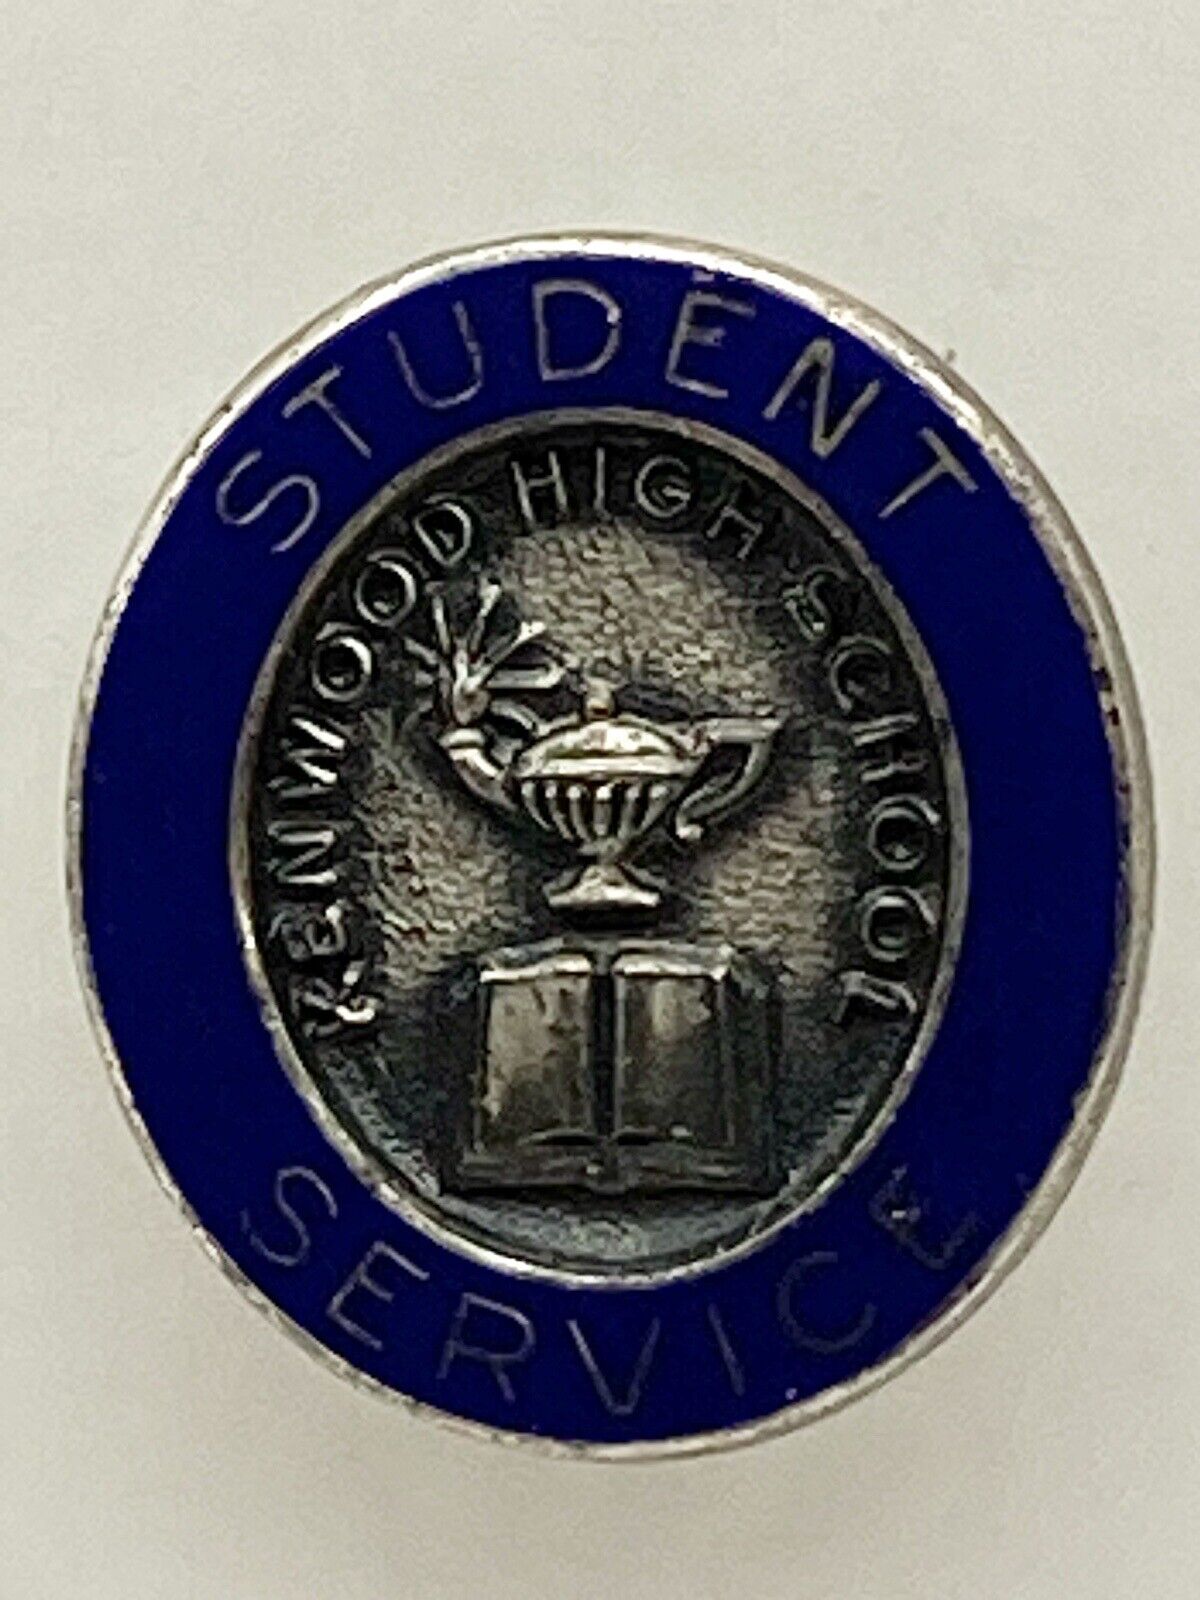 Vintage Kenwood High School Student Service Oval Shaped Lapel Pin